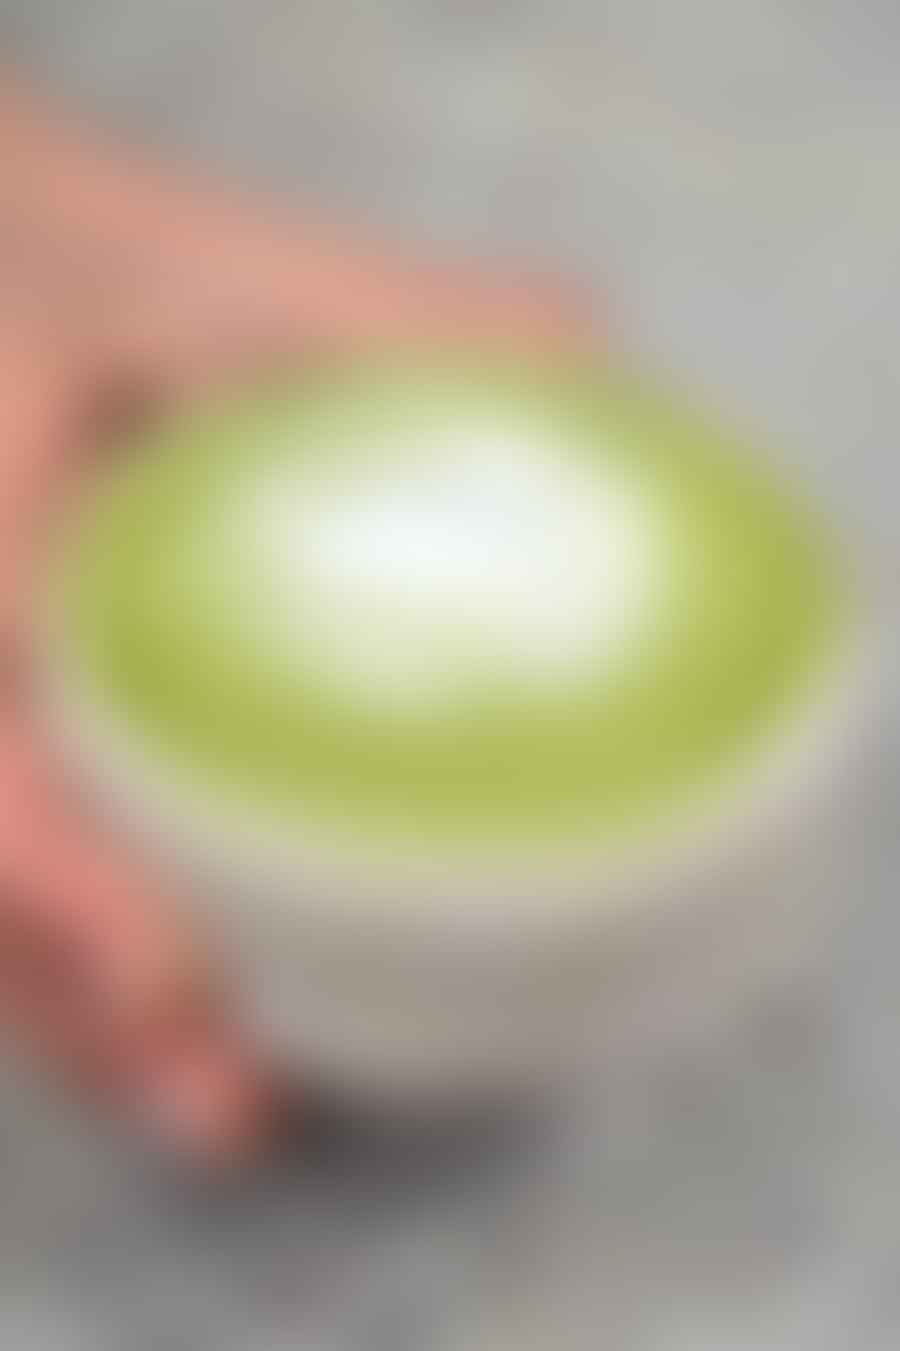 Pouring the milk into the matcha paste